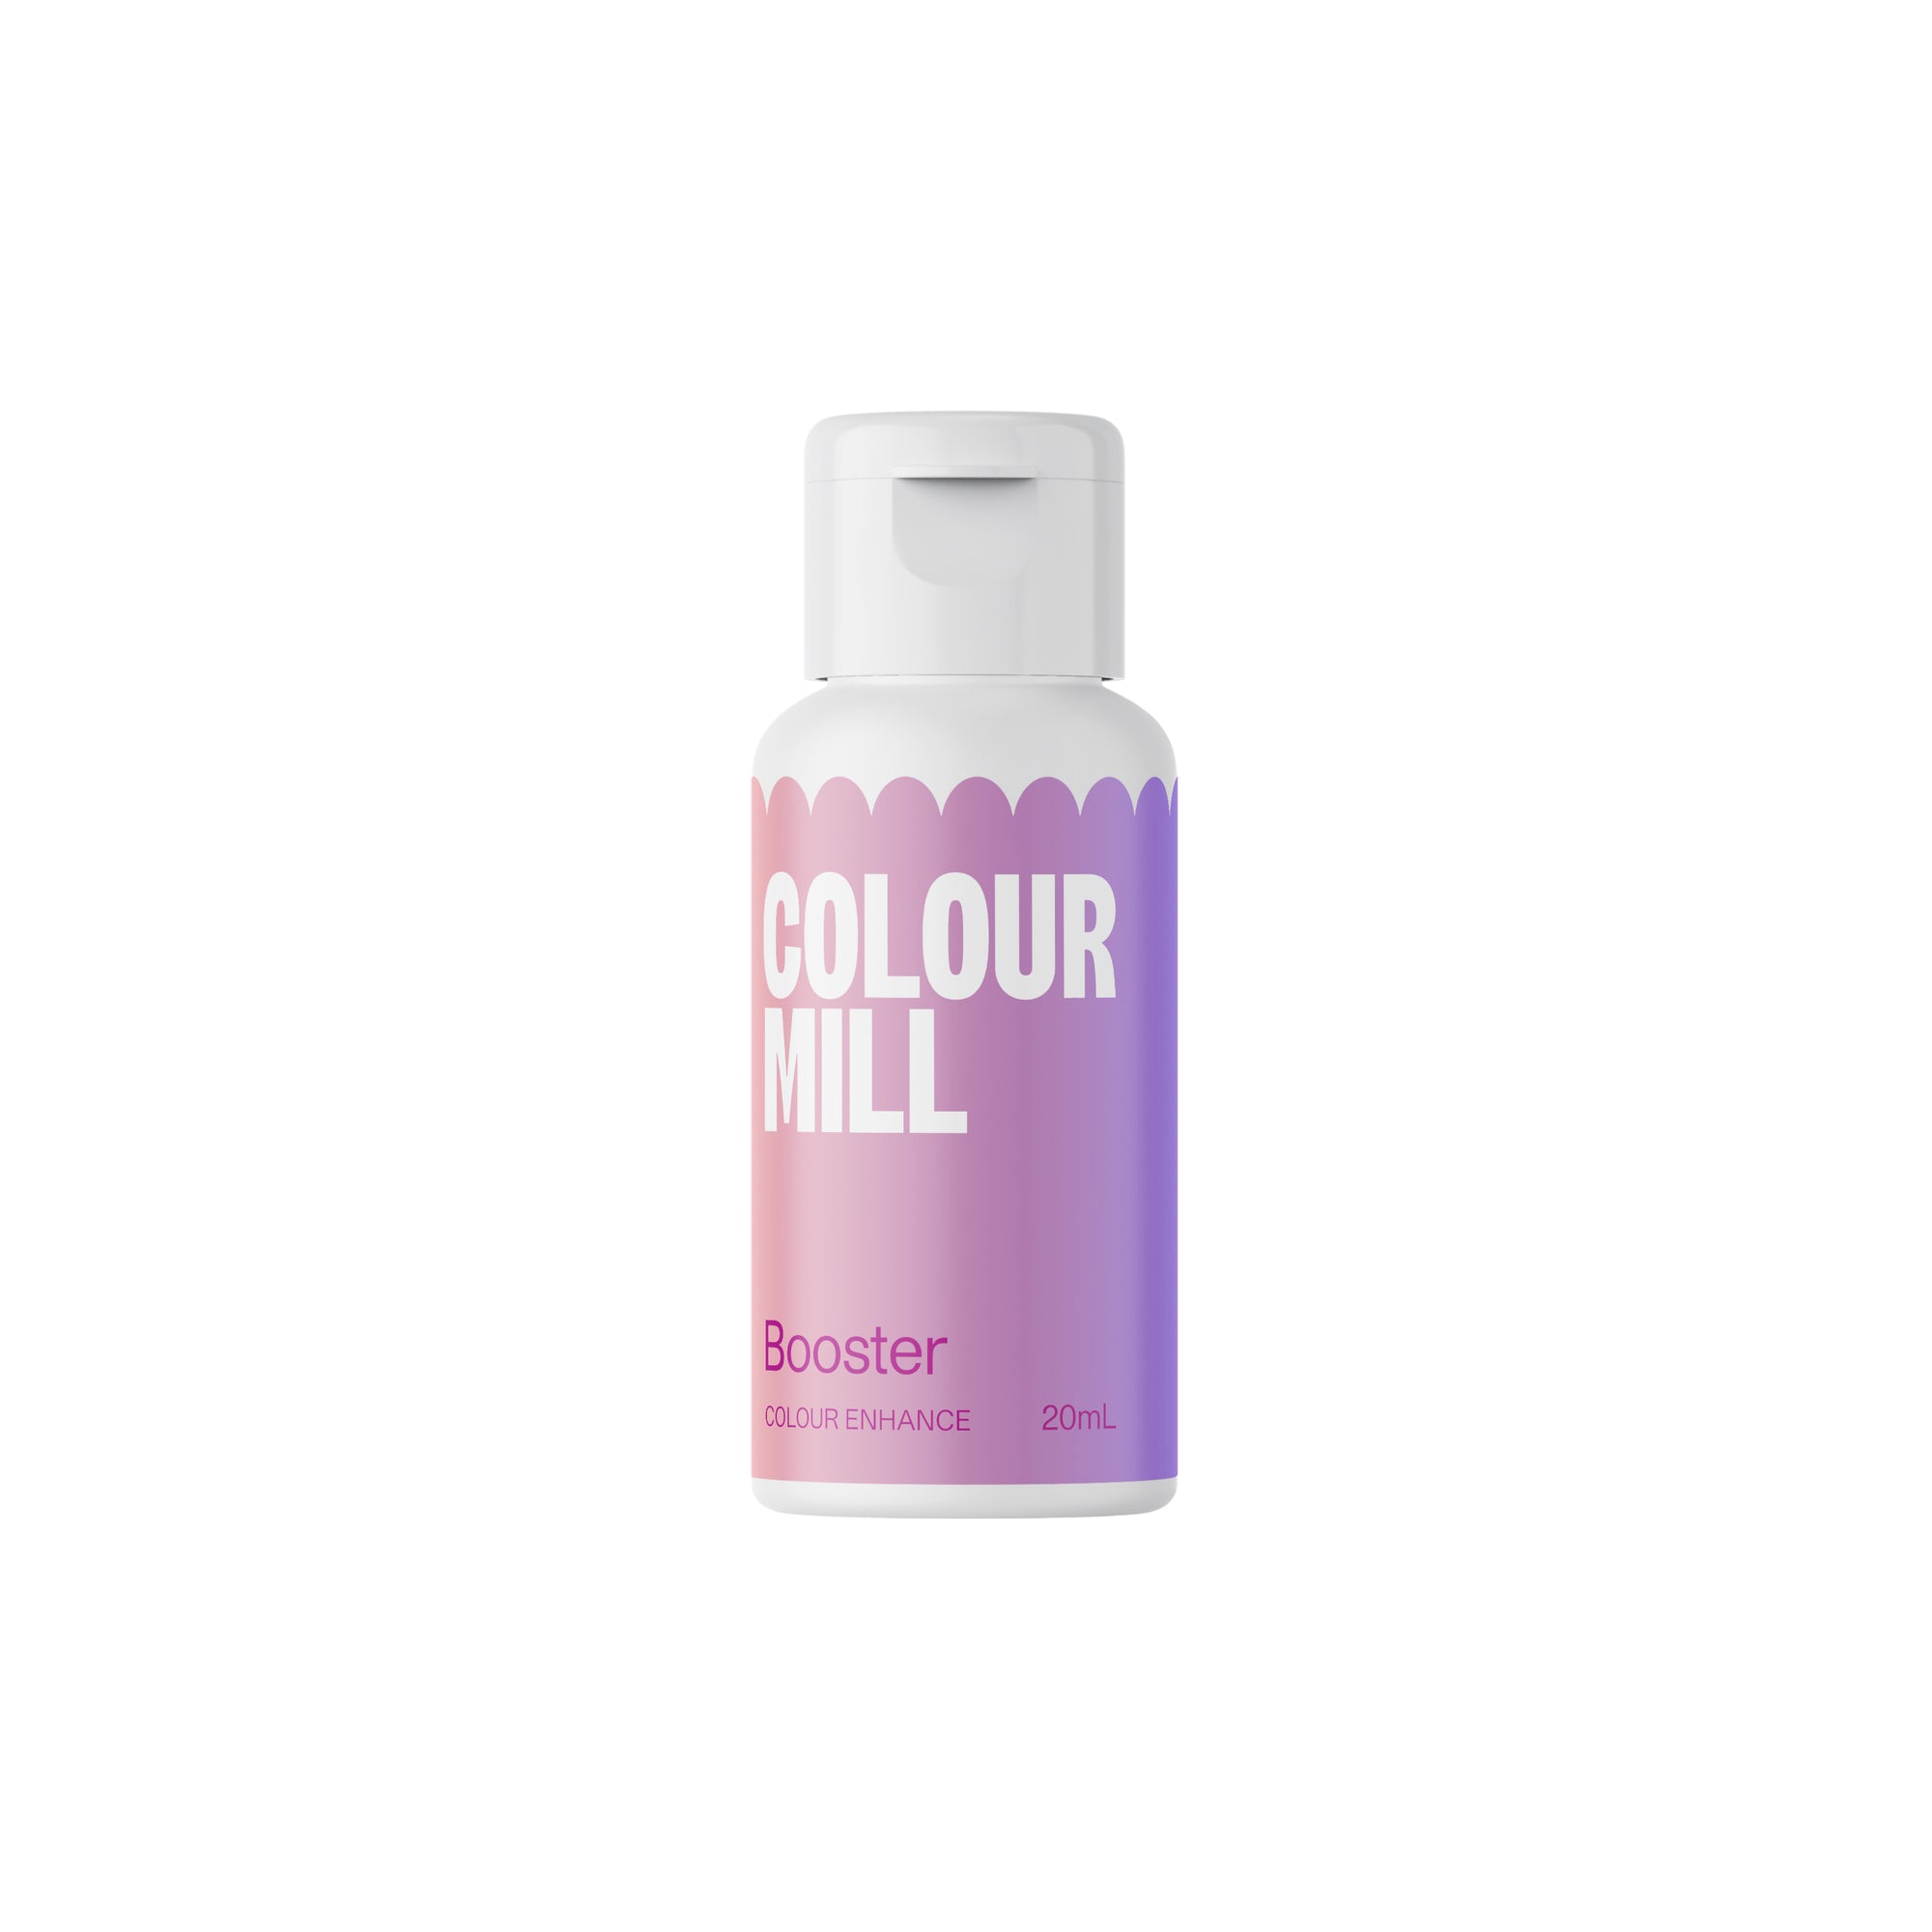 Colour Mill BOOSTER 20ml